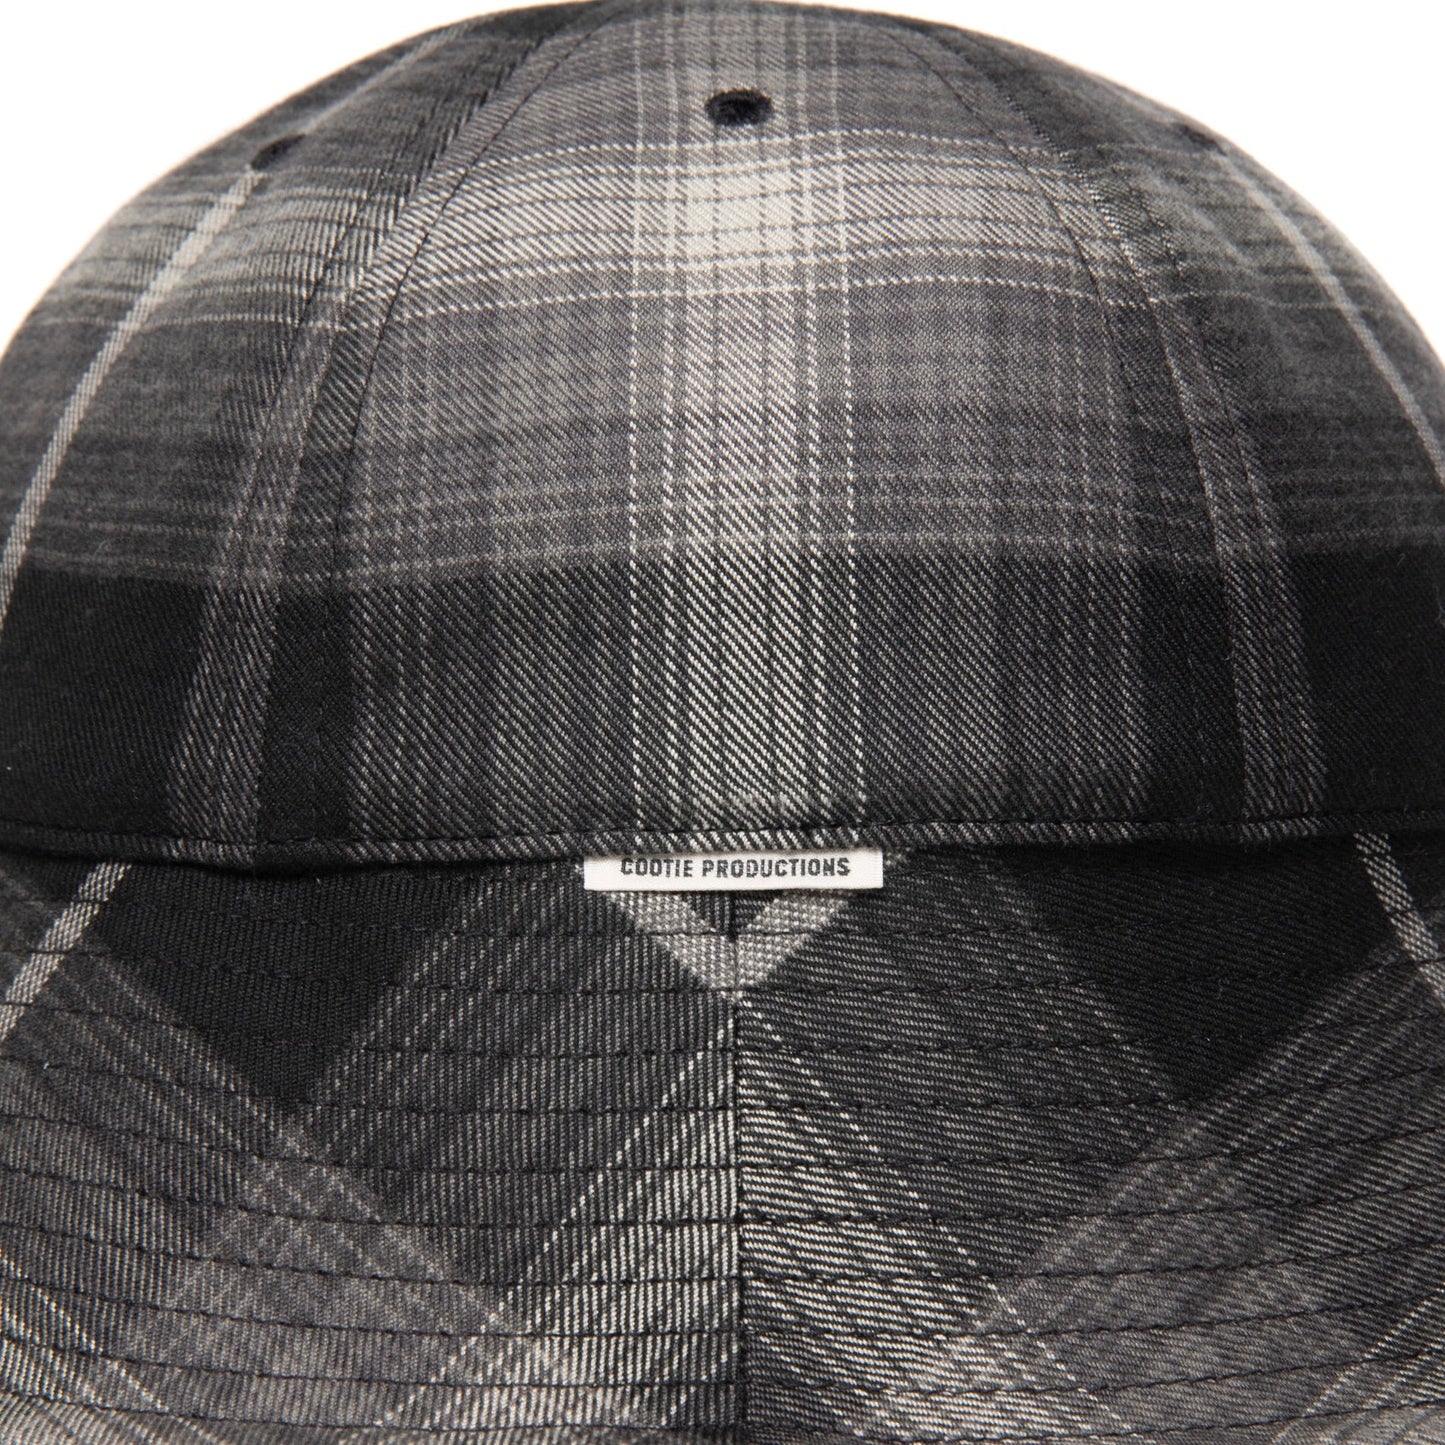 R/C Ombre Check Ball Hat